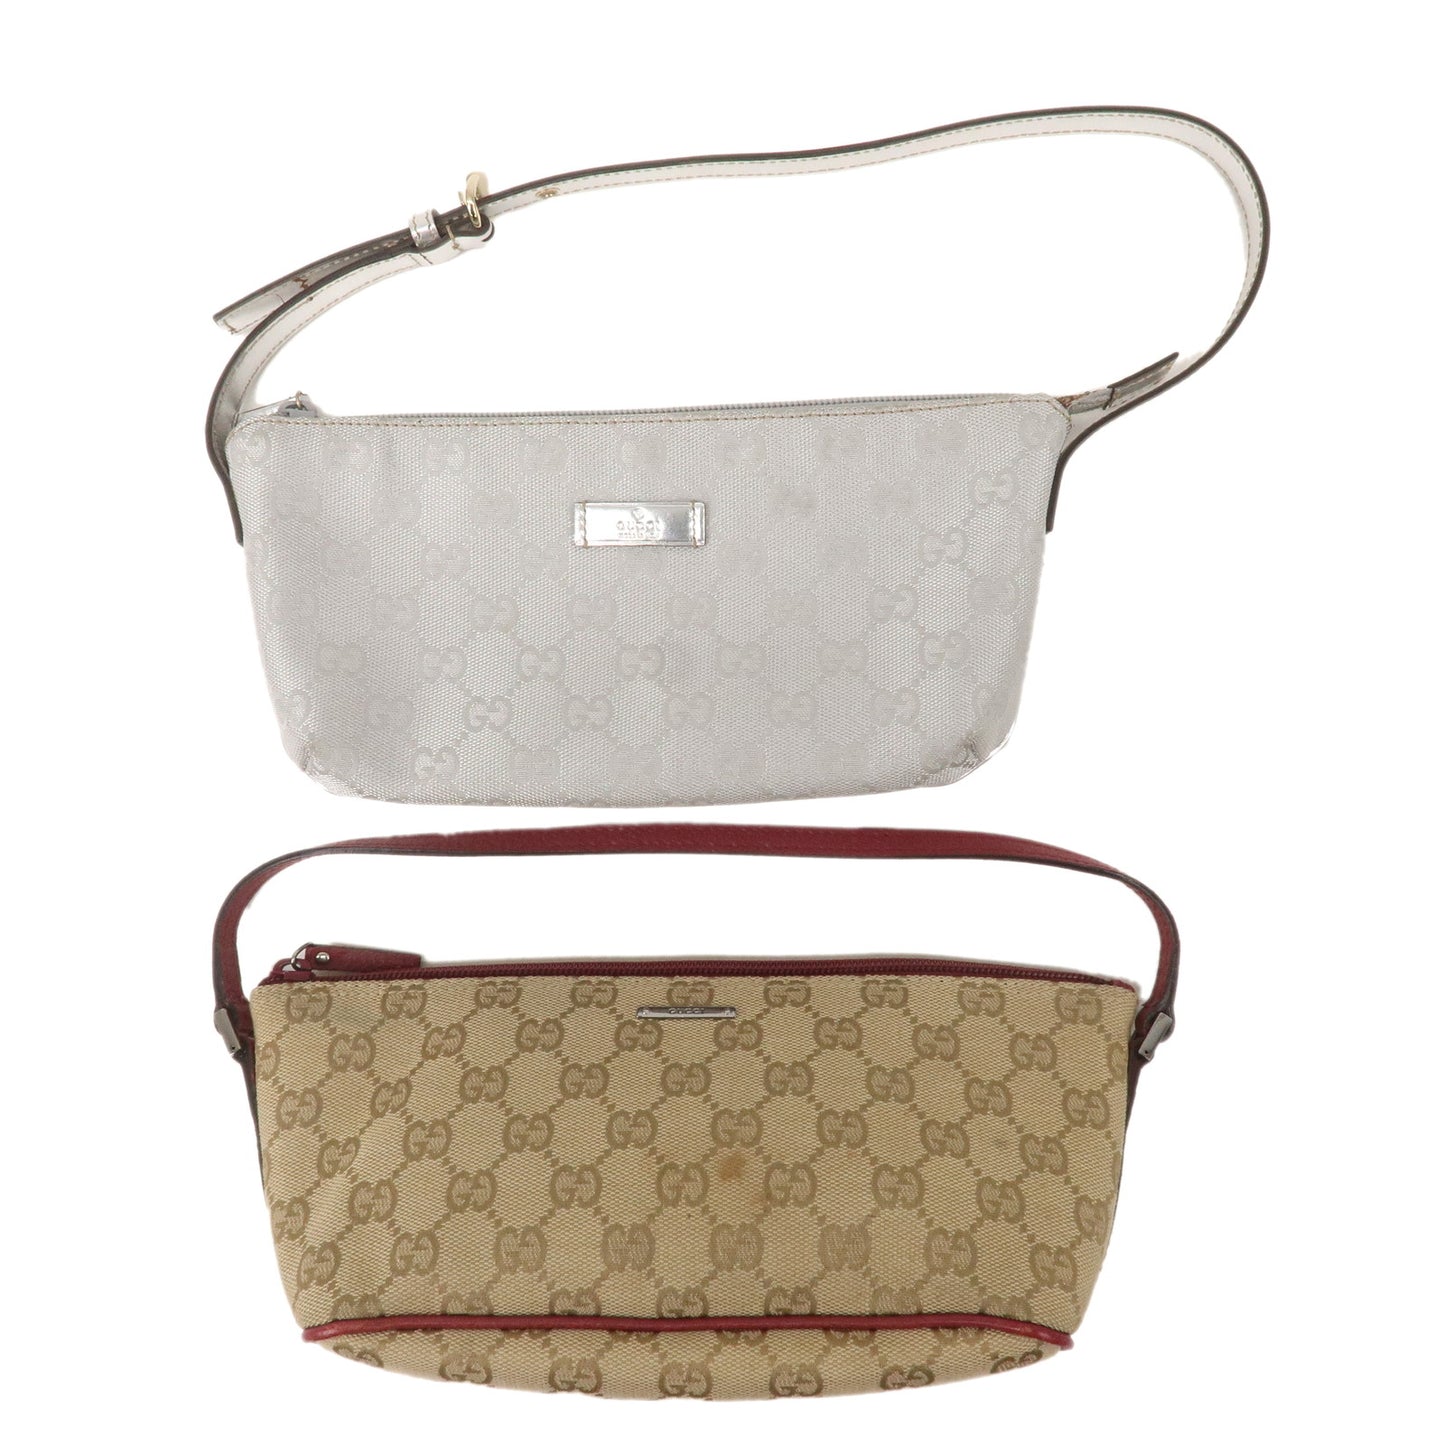 GUCCI-Boat-Bag-Set-of-2-GG-Canvas-Leather-Hand-Bag-07198-190393